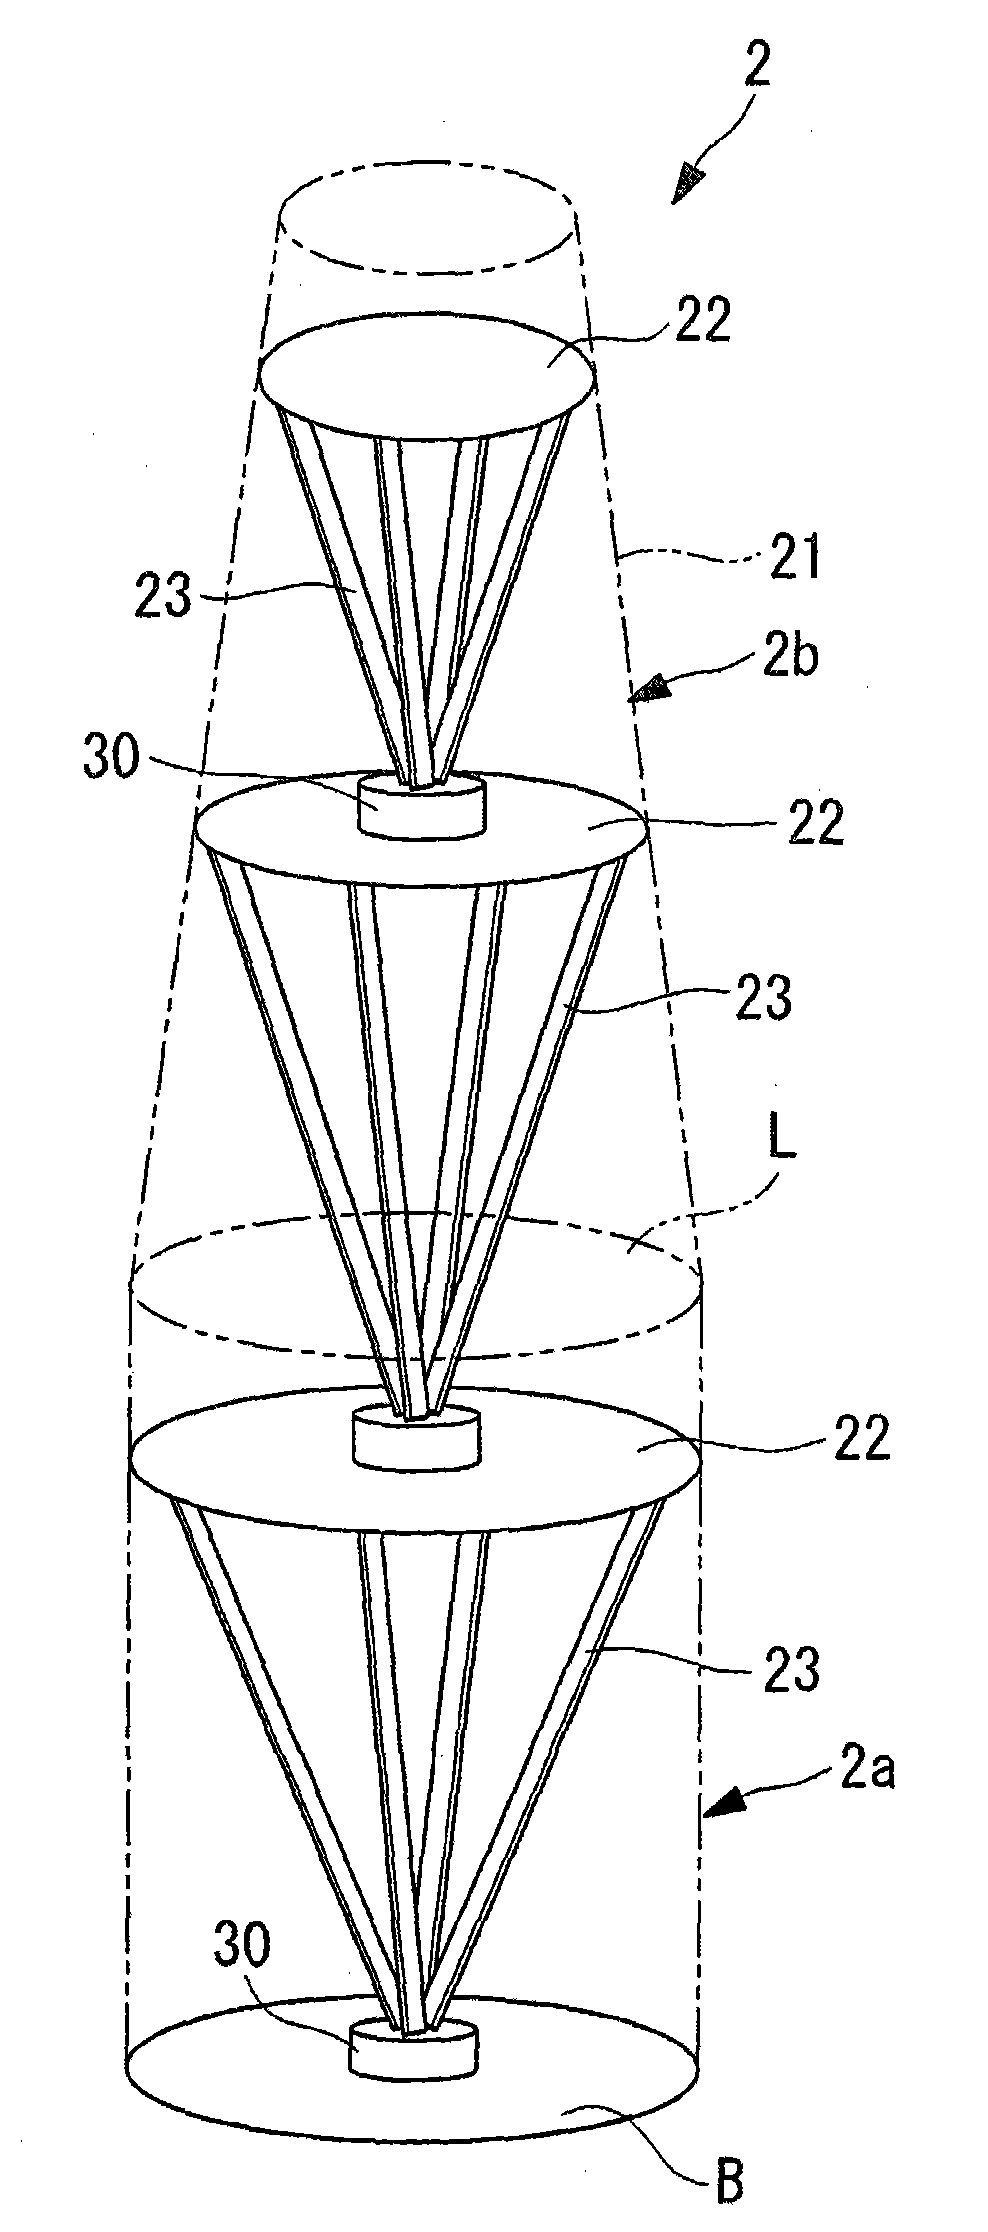 Tower for windmill and wind generation device